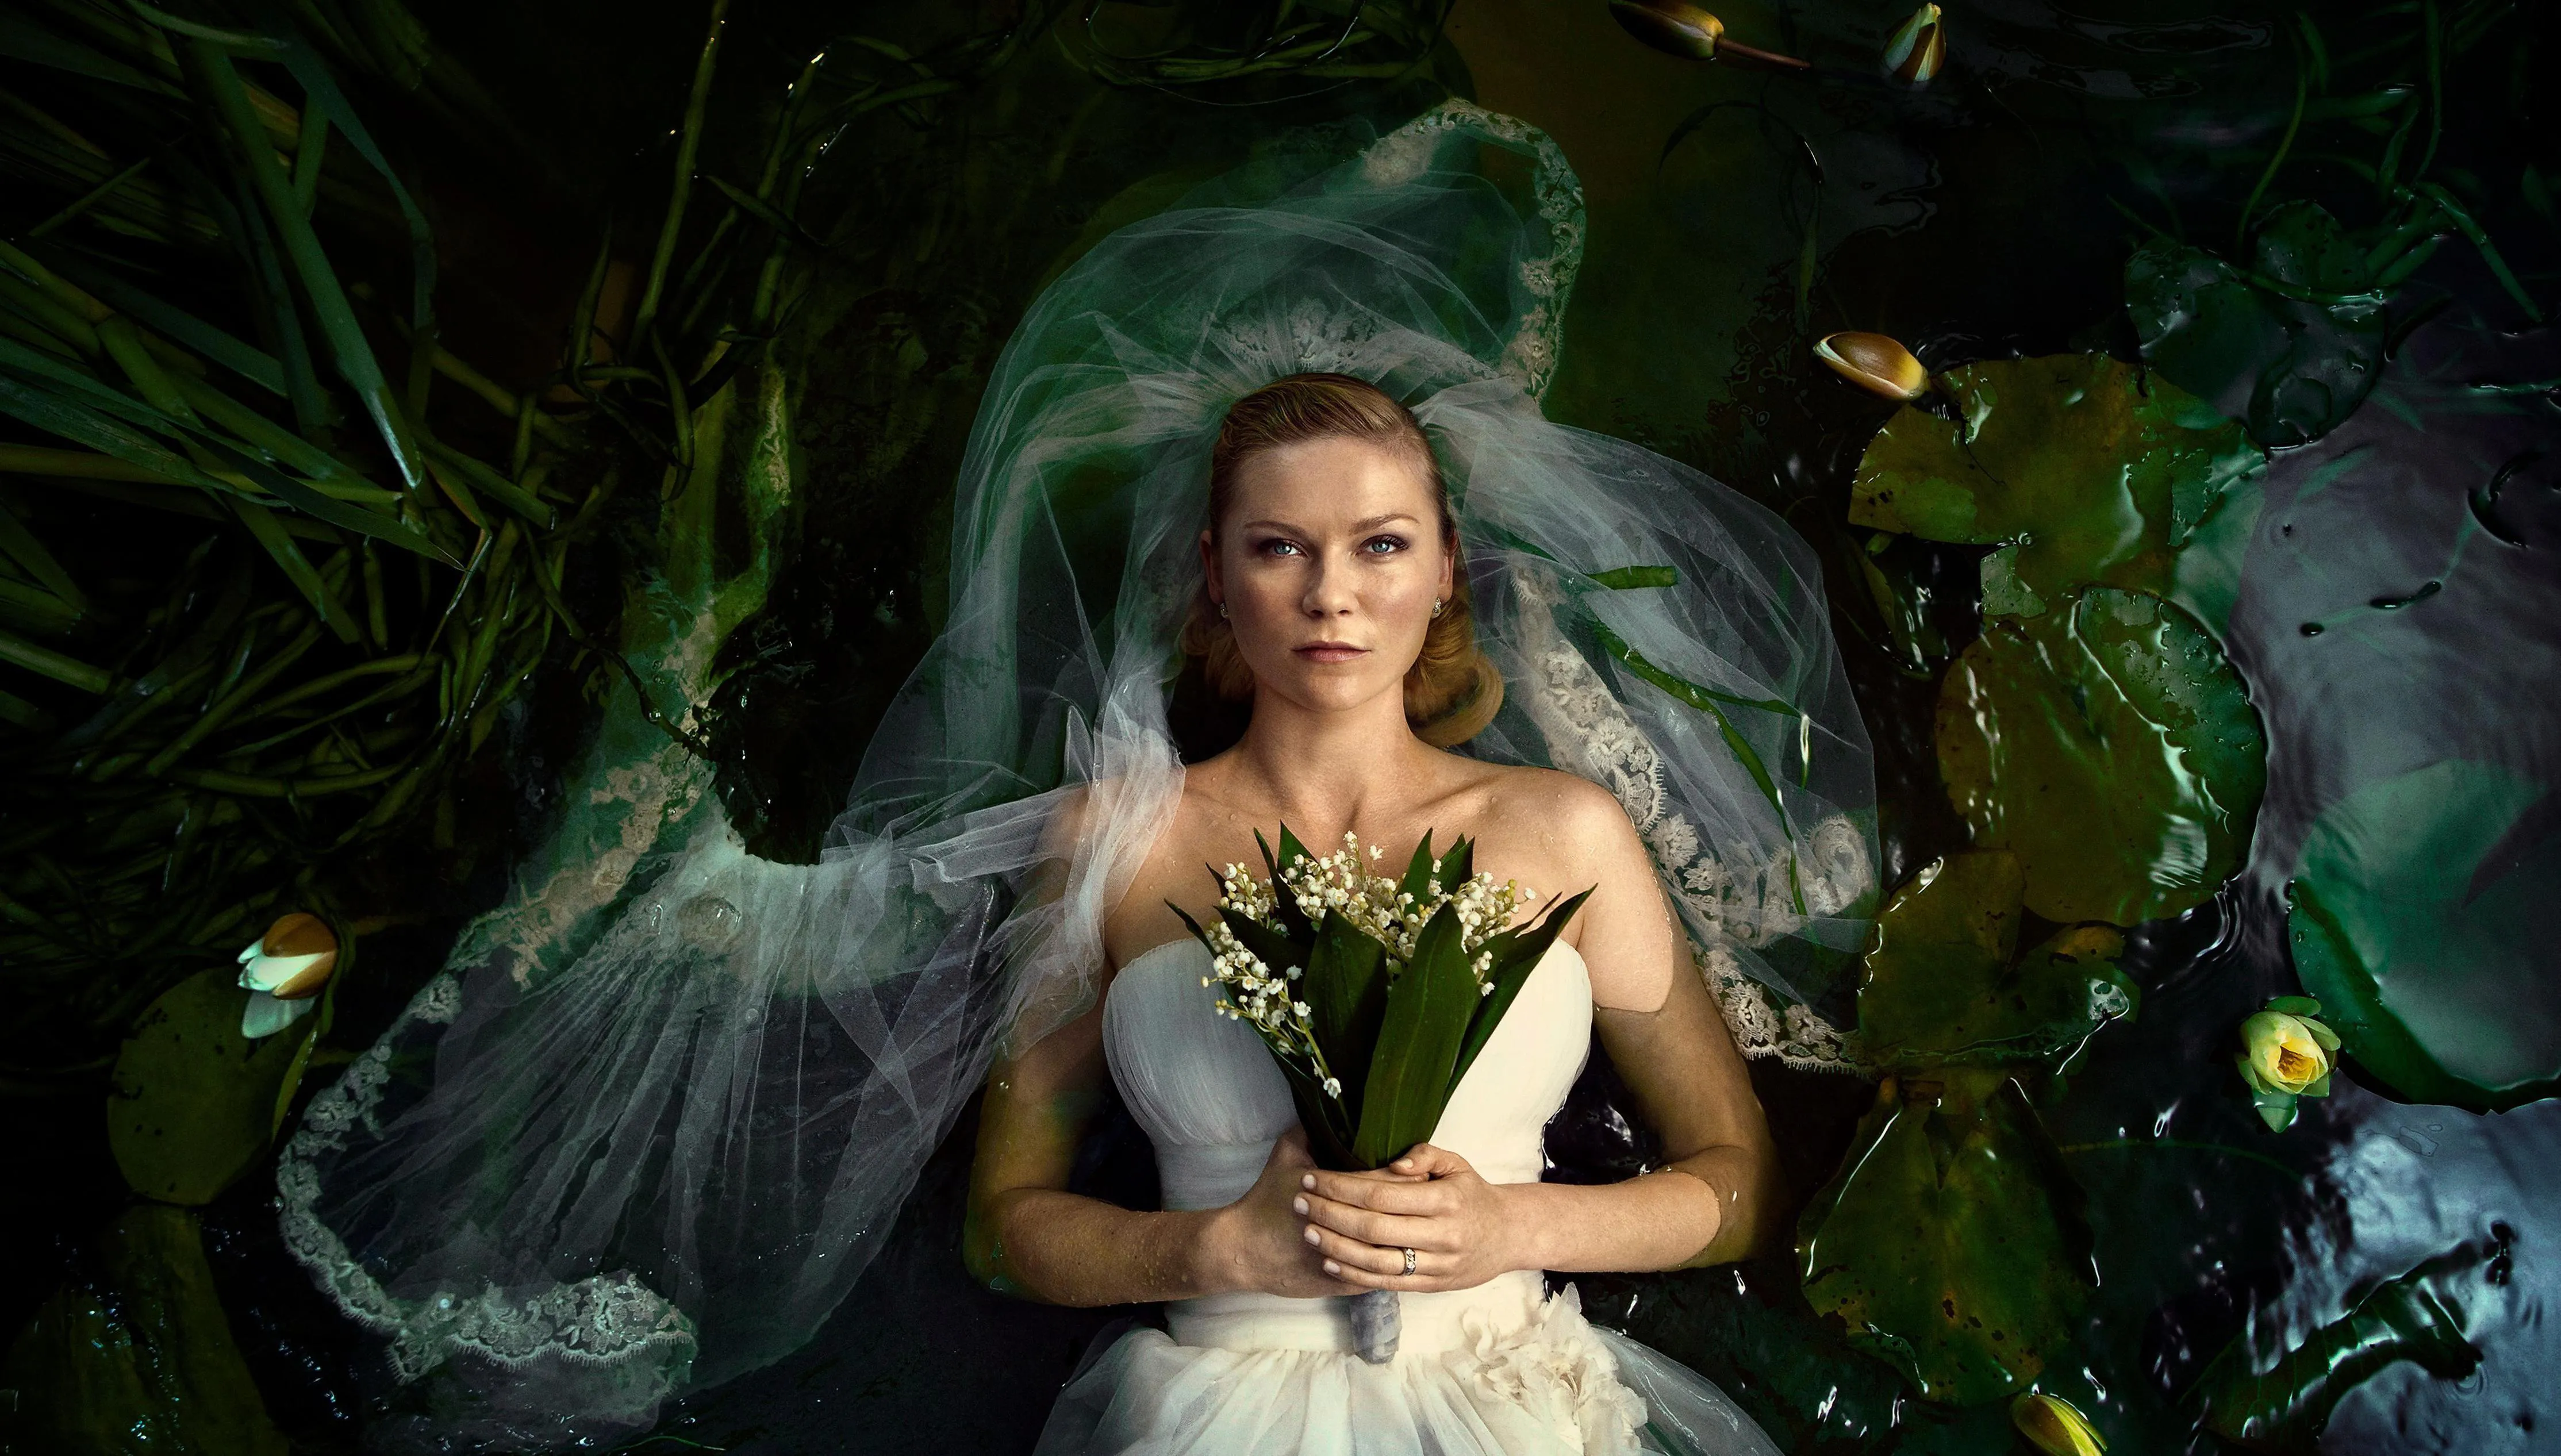 Melancholia, Justice of Ophelia by Lars von Trier for sale